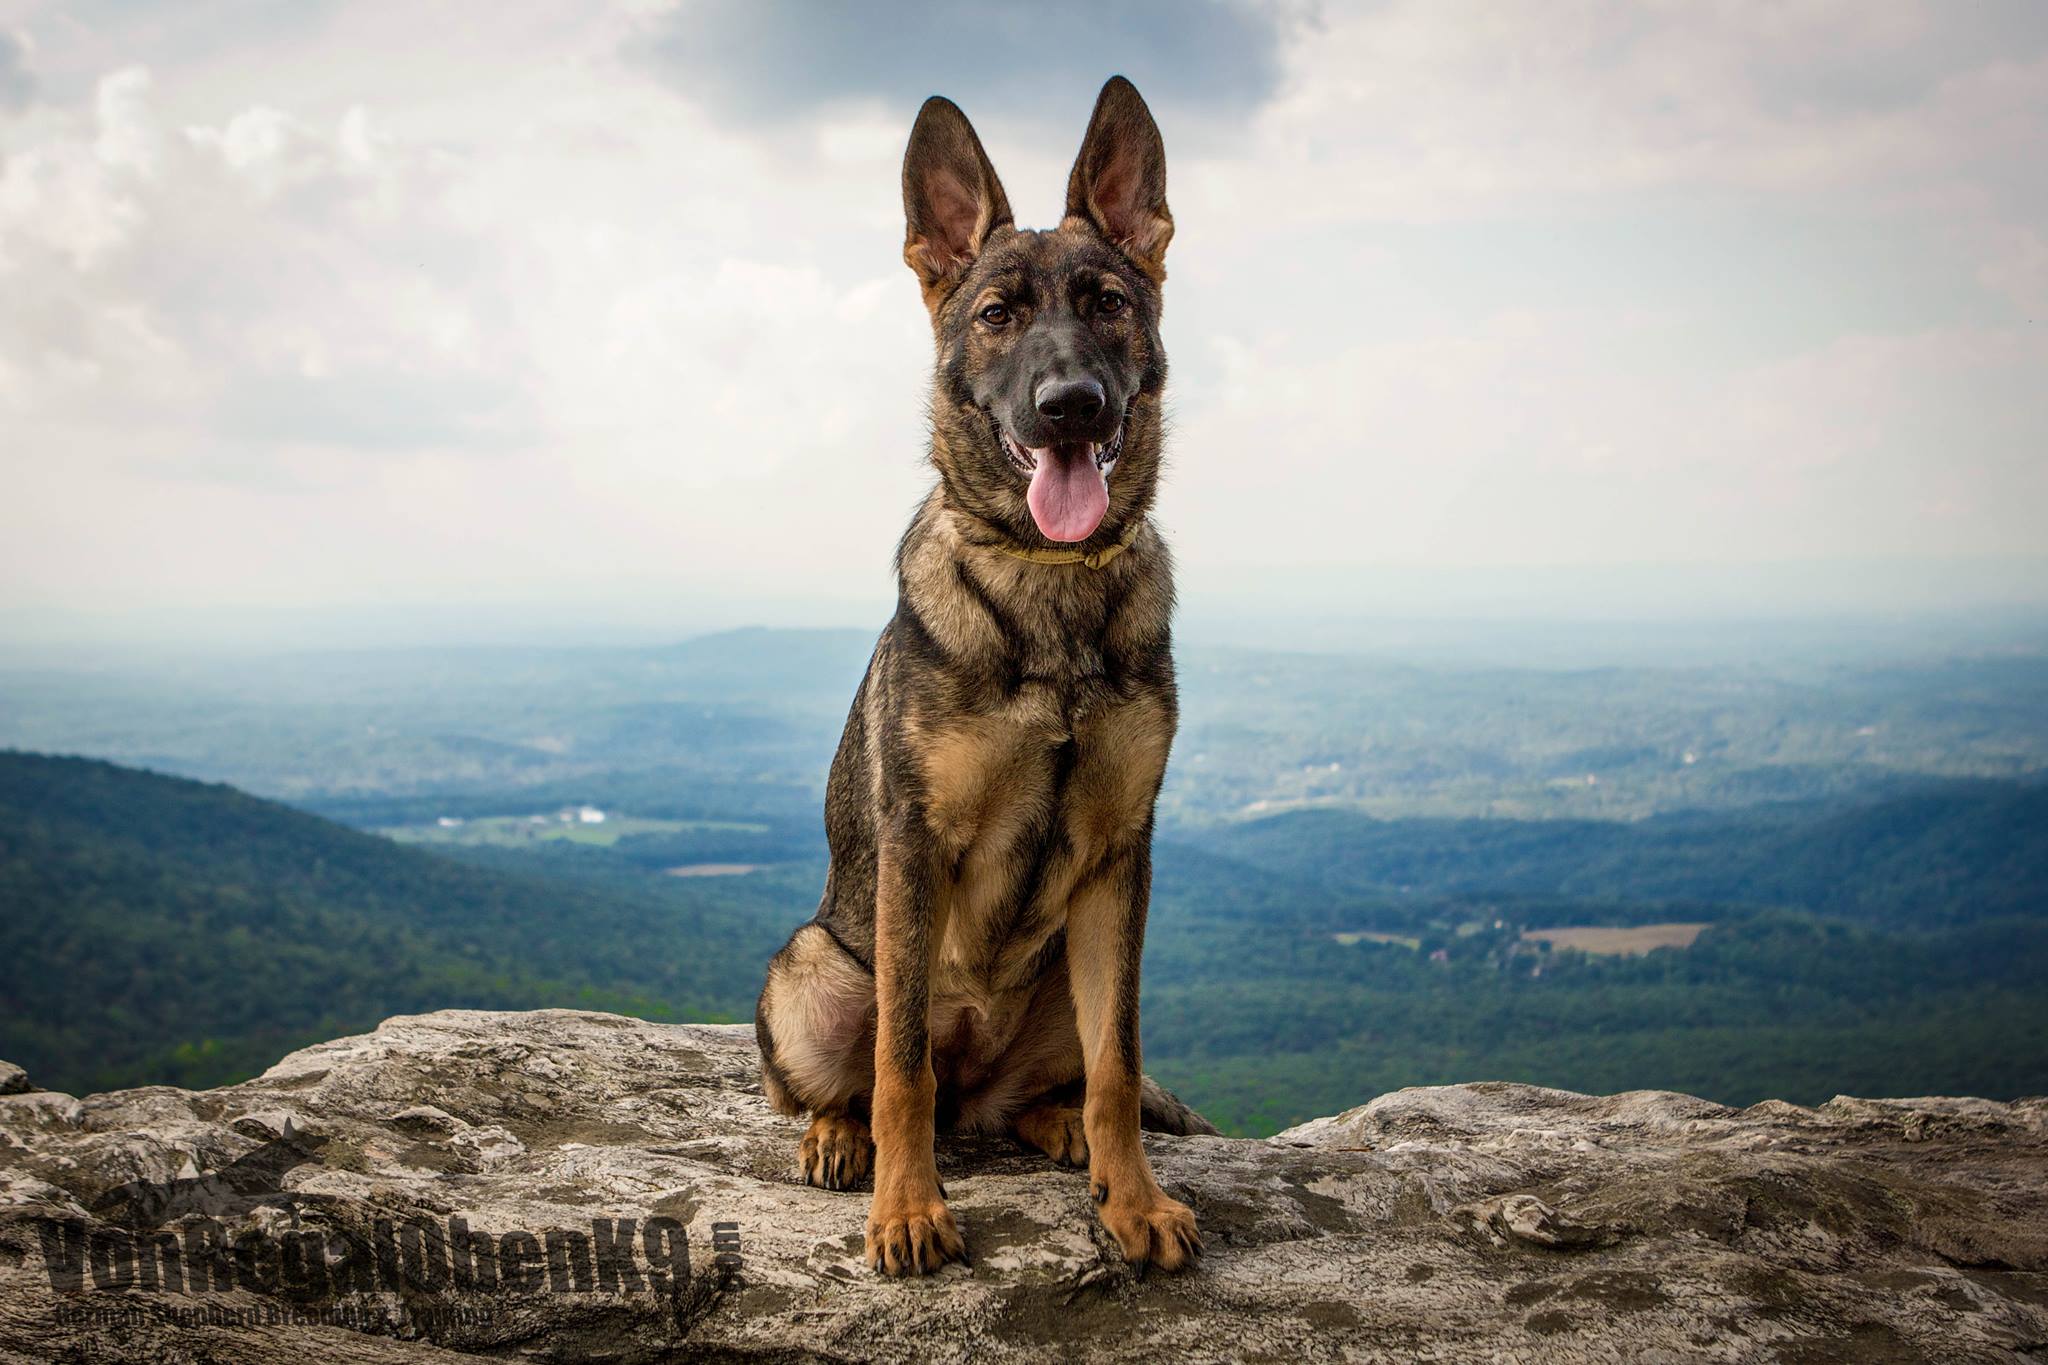 Karma as a puppy on Hanging Rock at Hanging Rock State Park.